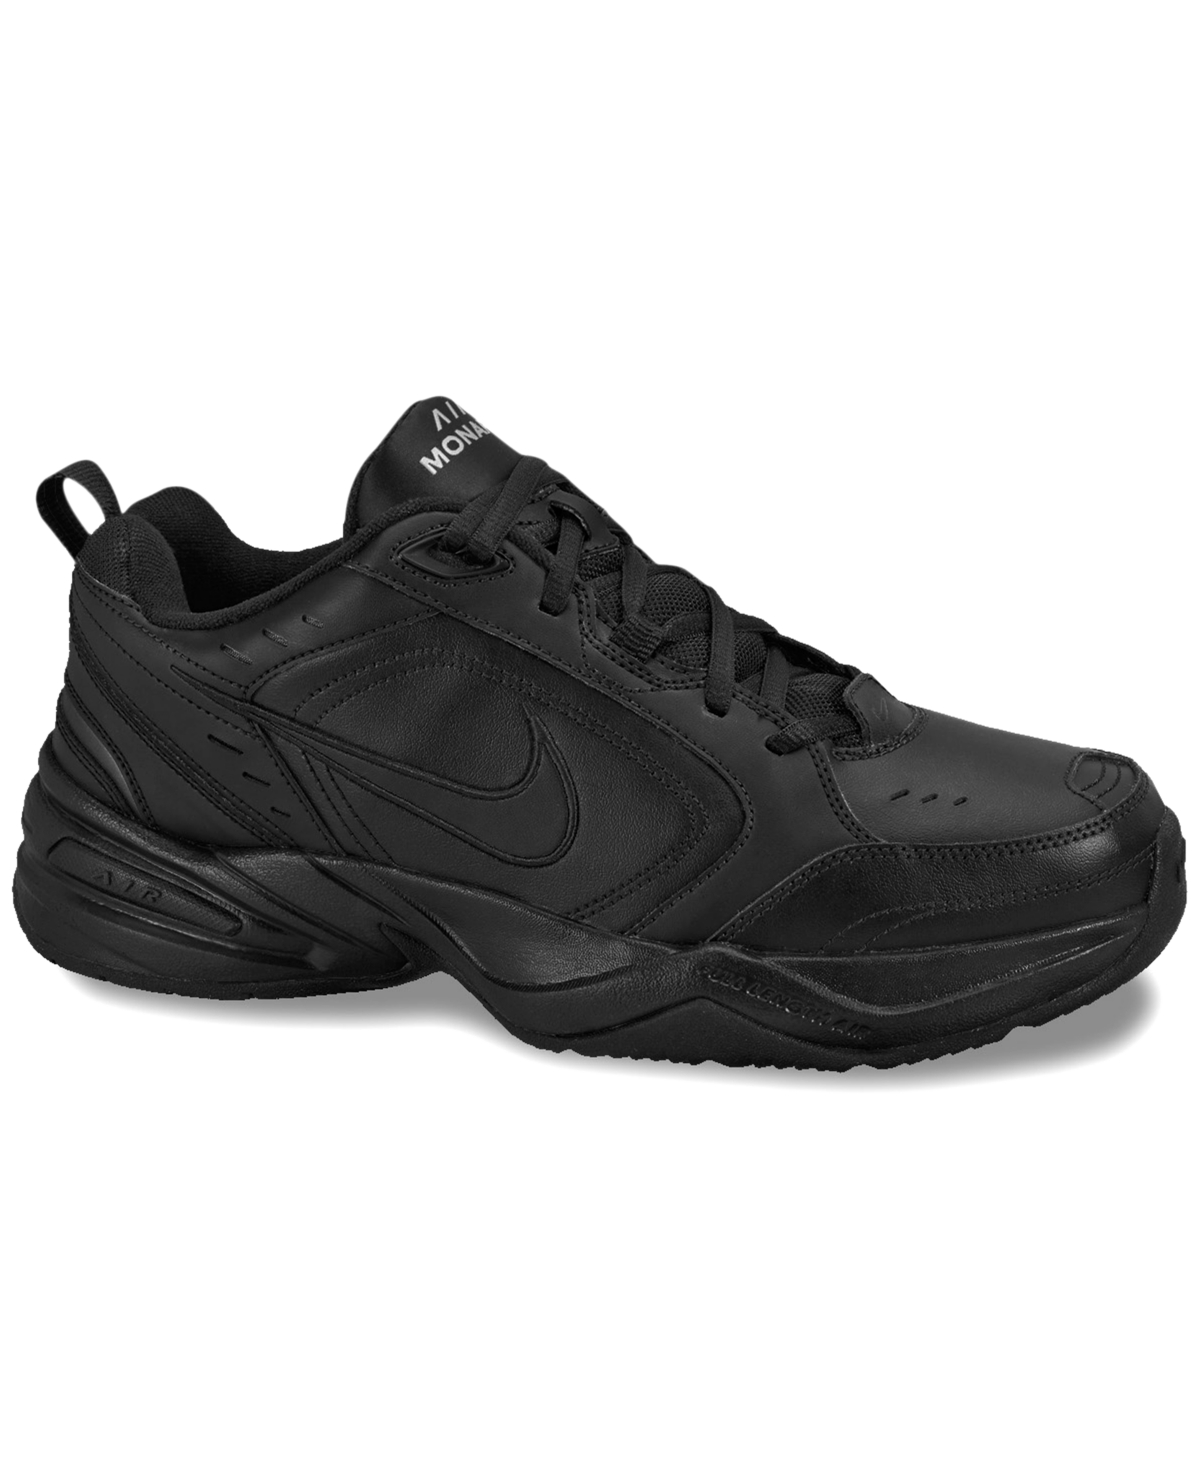 Nike Men's Air Monarch Iv Training Sneakers from Finish Line